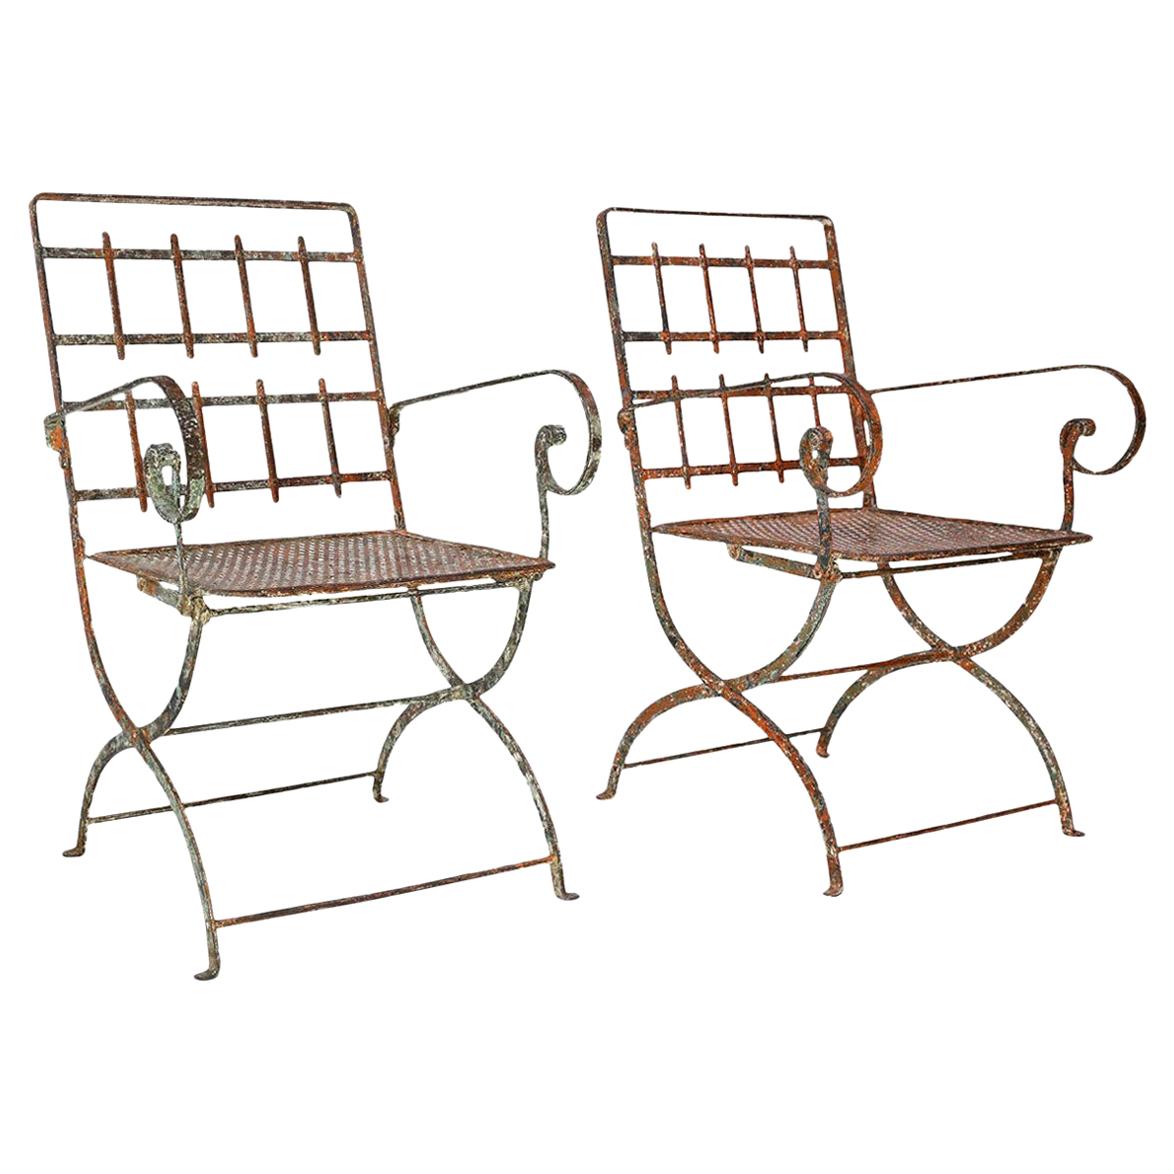 Pair of French Iron Garden Chairs